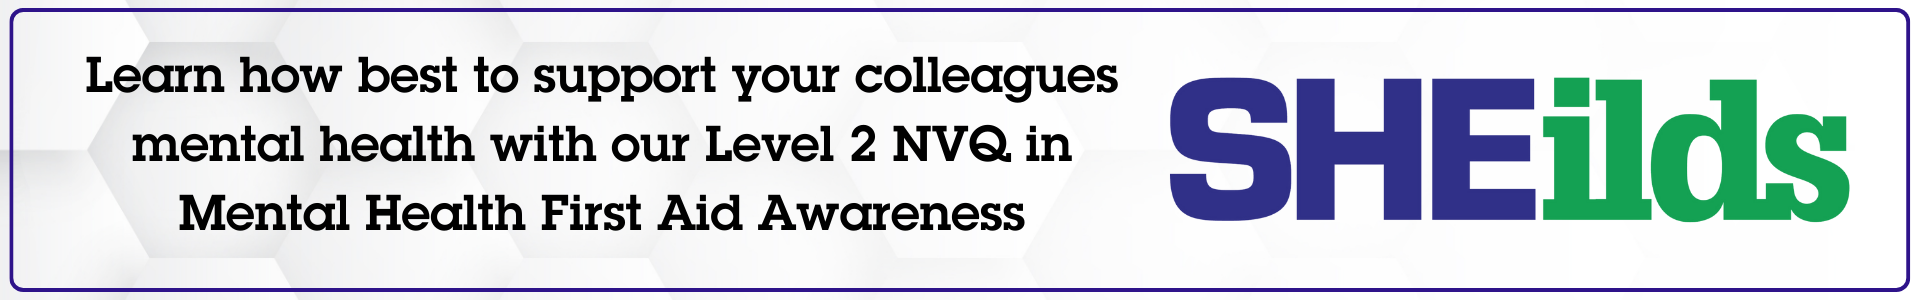 Support your colleagues with our NVQ Level 2 in Mental Health First Aid Awareness